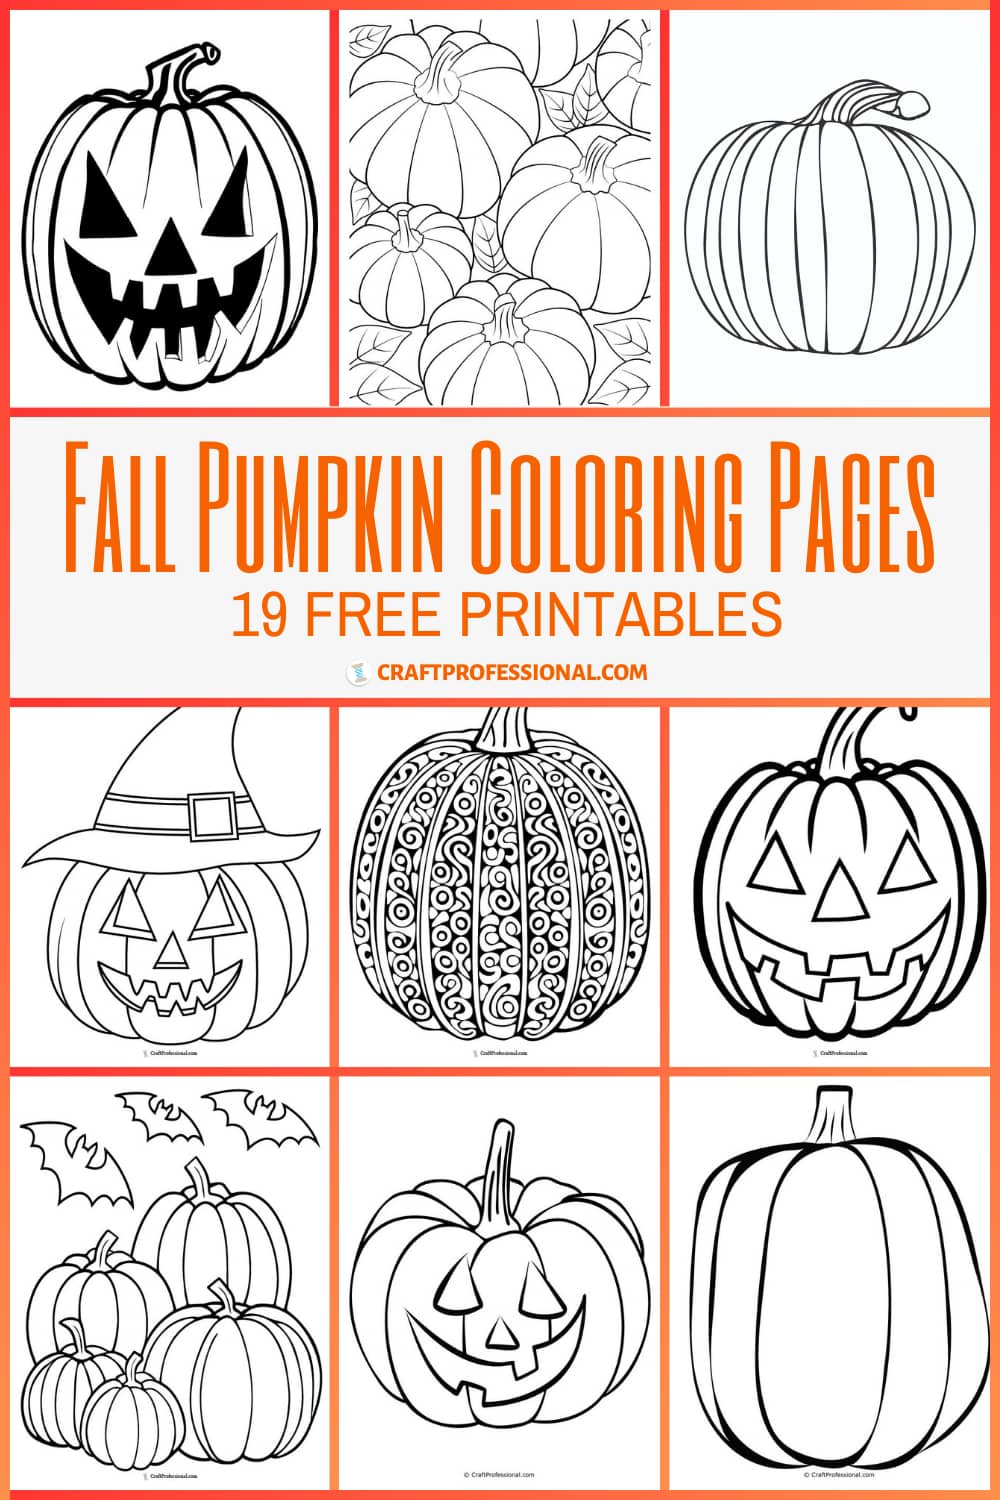 Drawings To Paint & Colour Halloween - Print Design 023